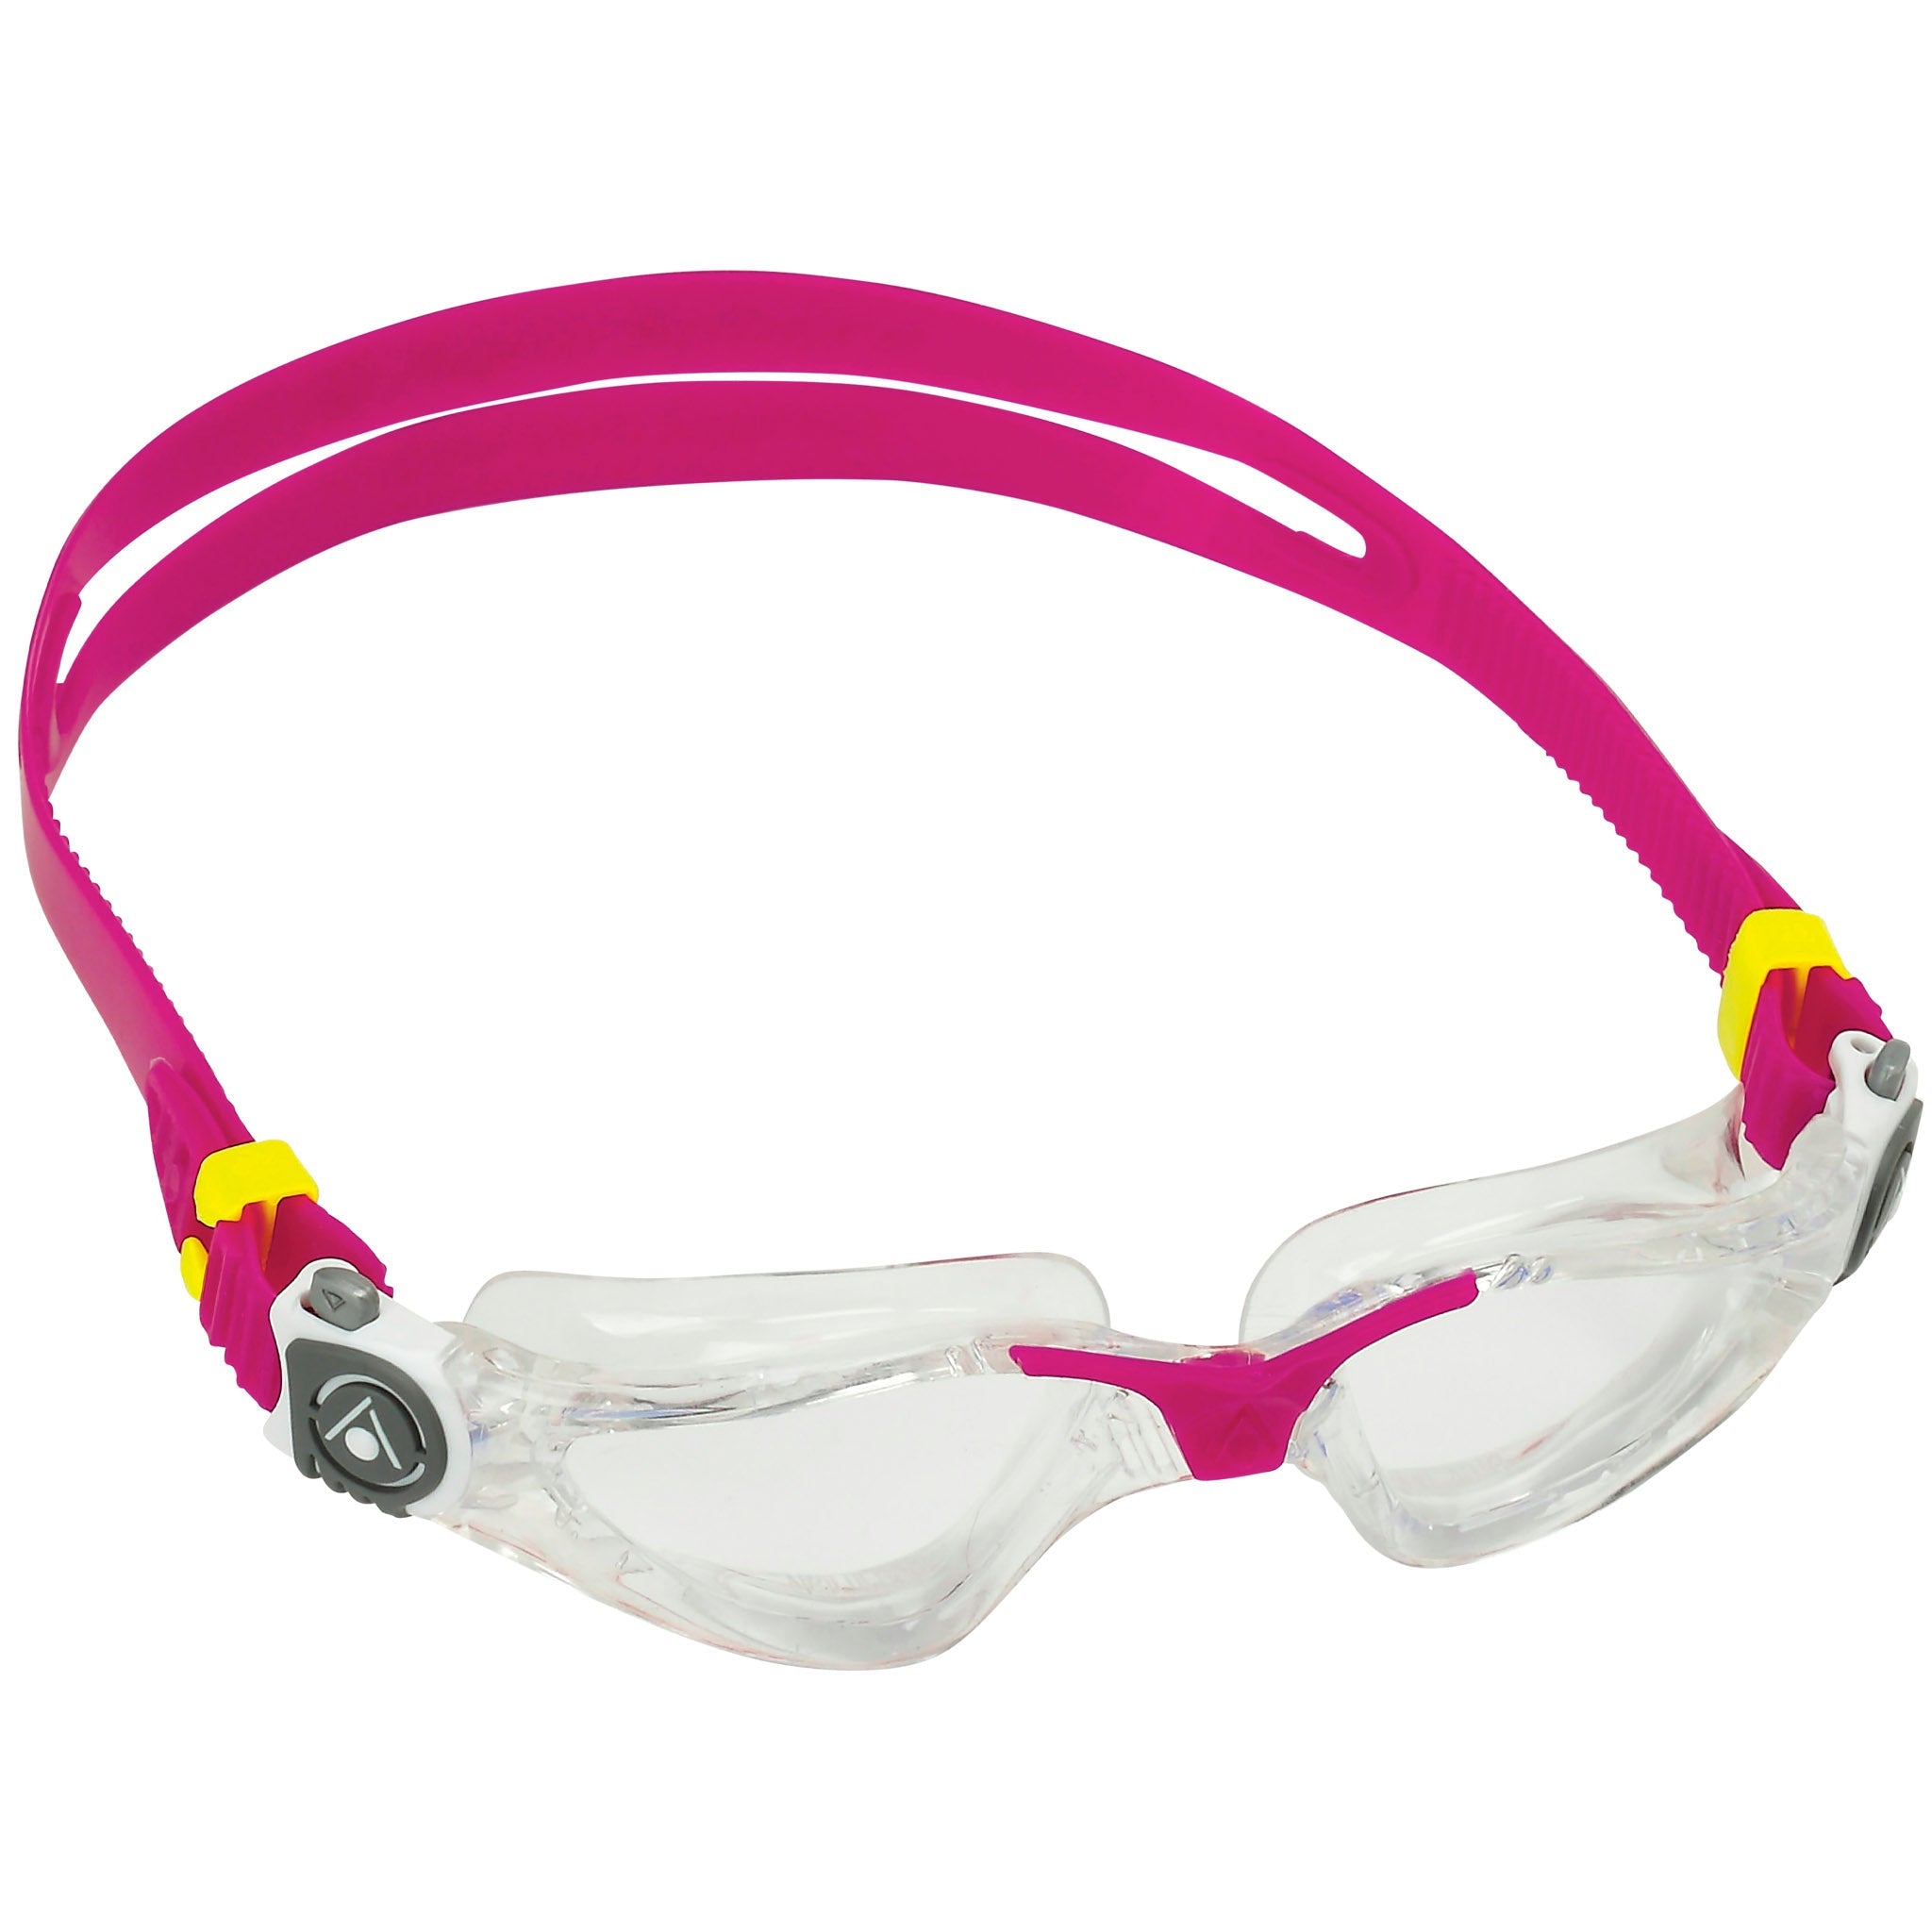 Aquasphere Kayenne Compact Swimming Goggles - Side